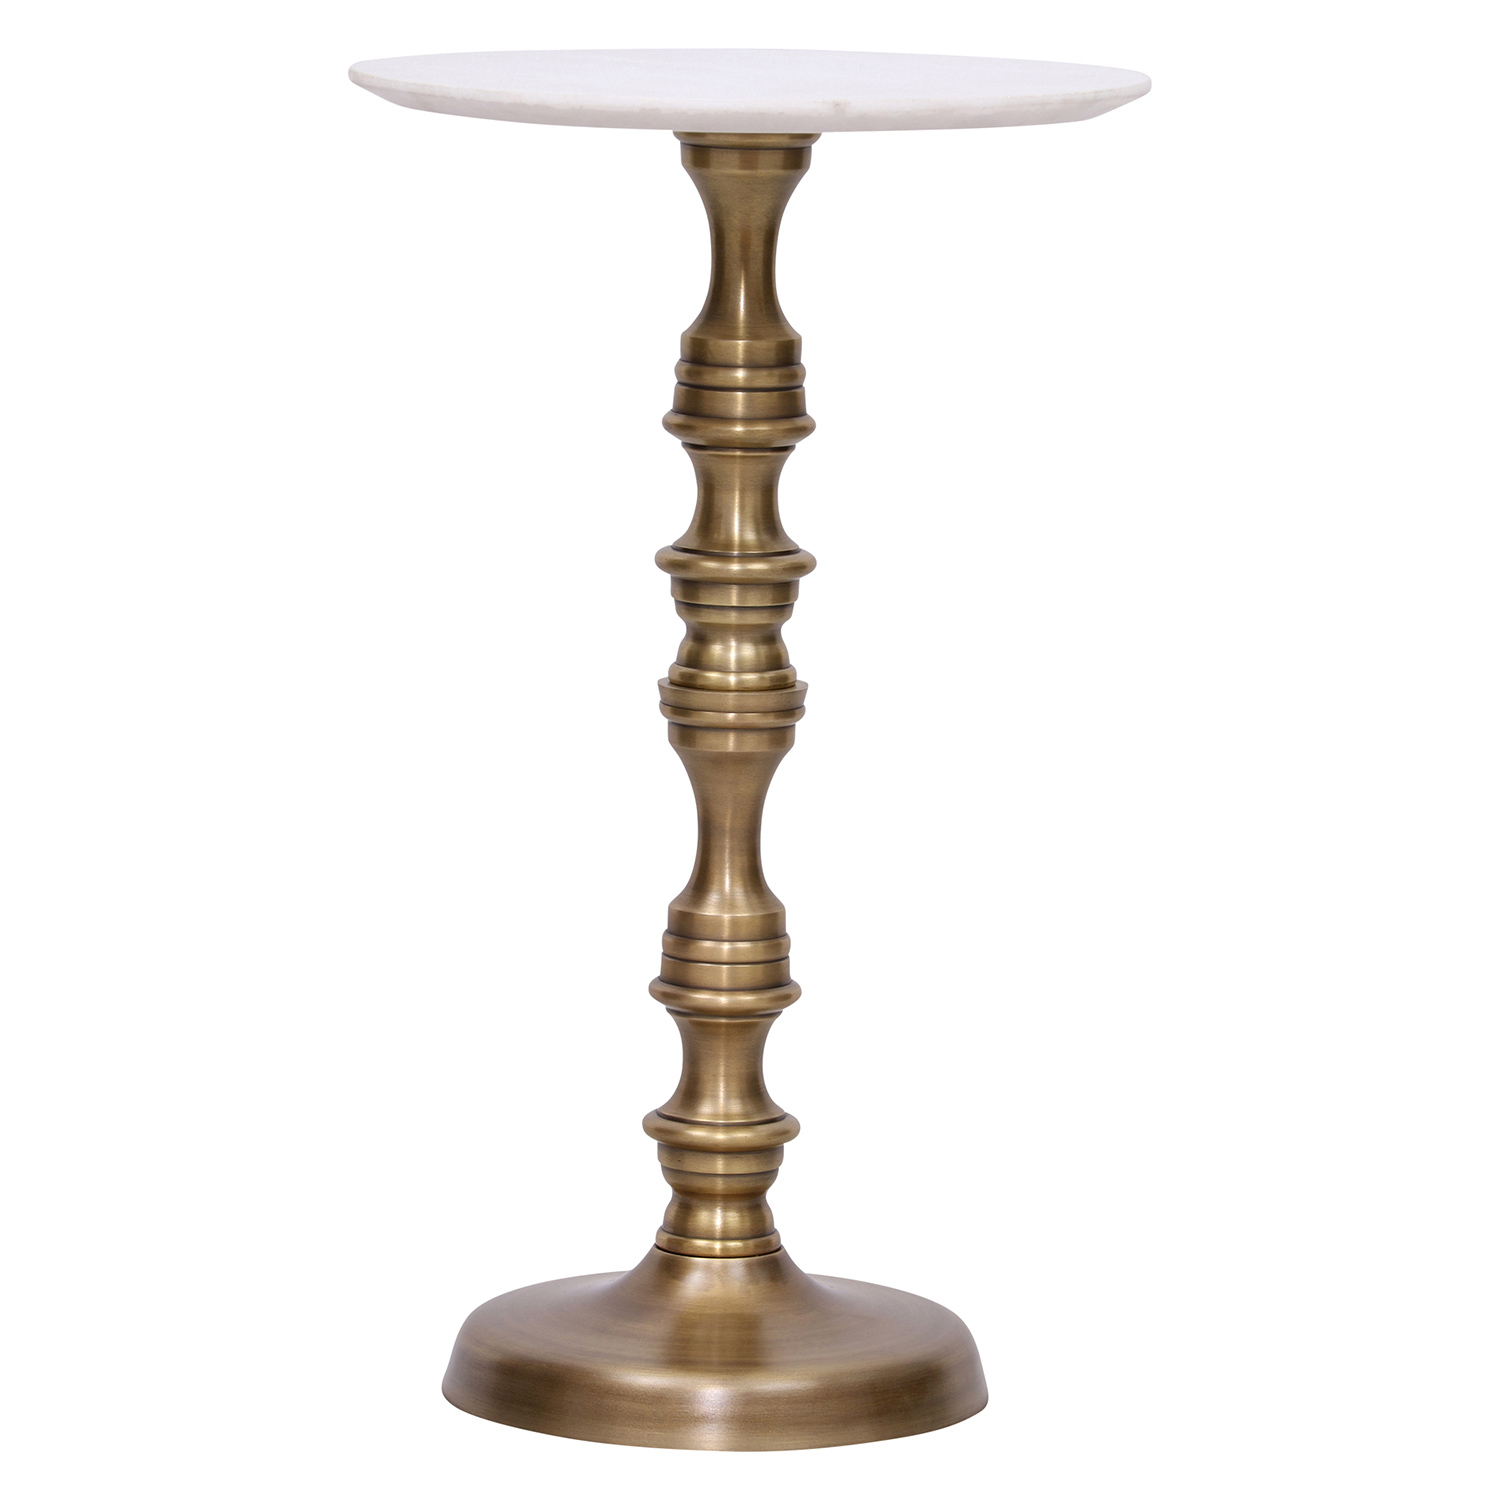 Ren-Wil Shelby Accent table - Brass Antique